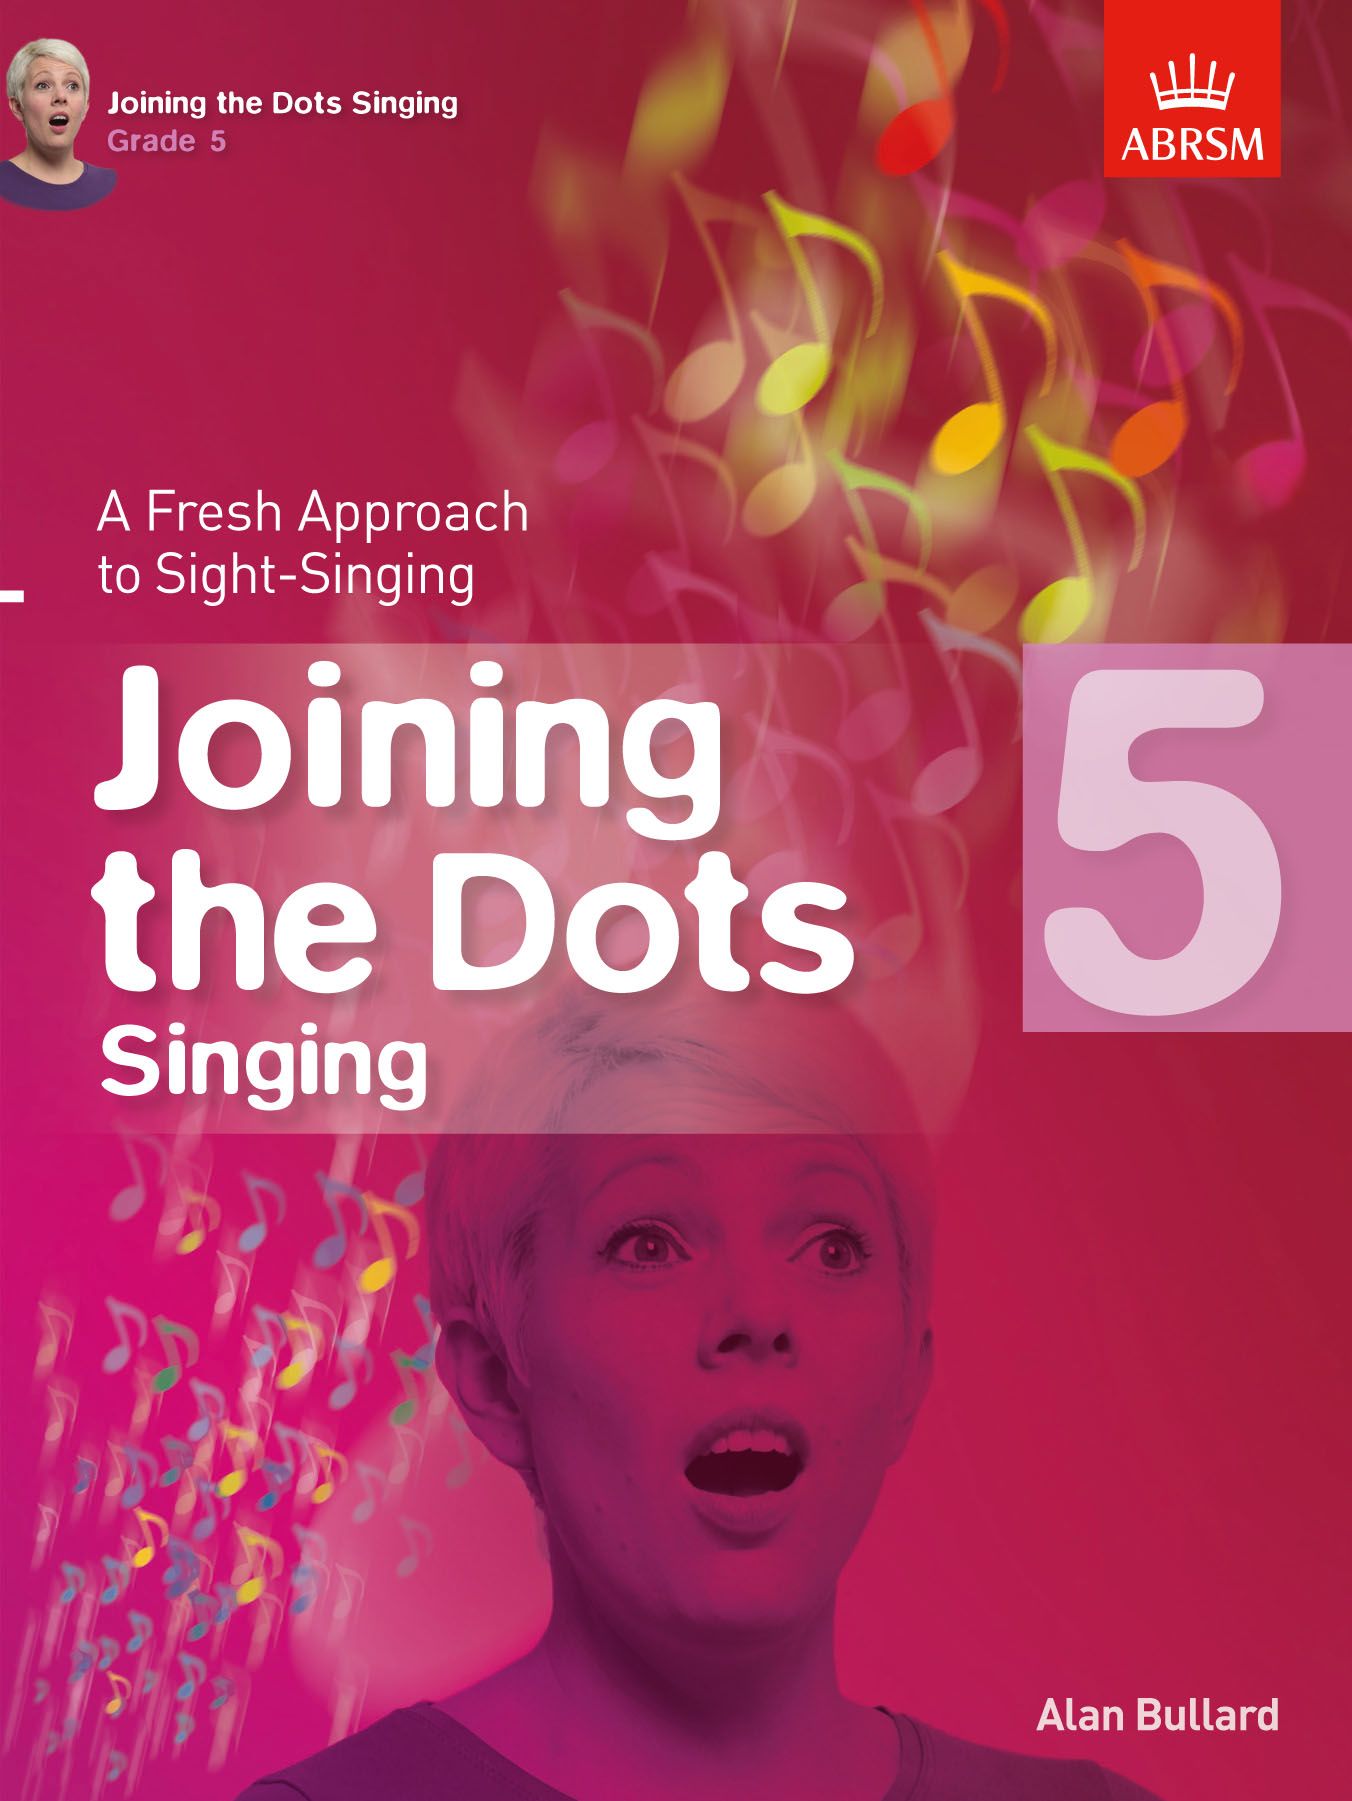 Joining the Dots for Singing G5